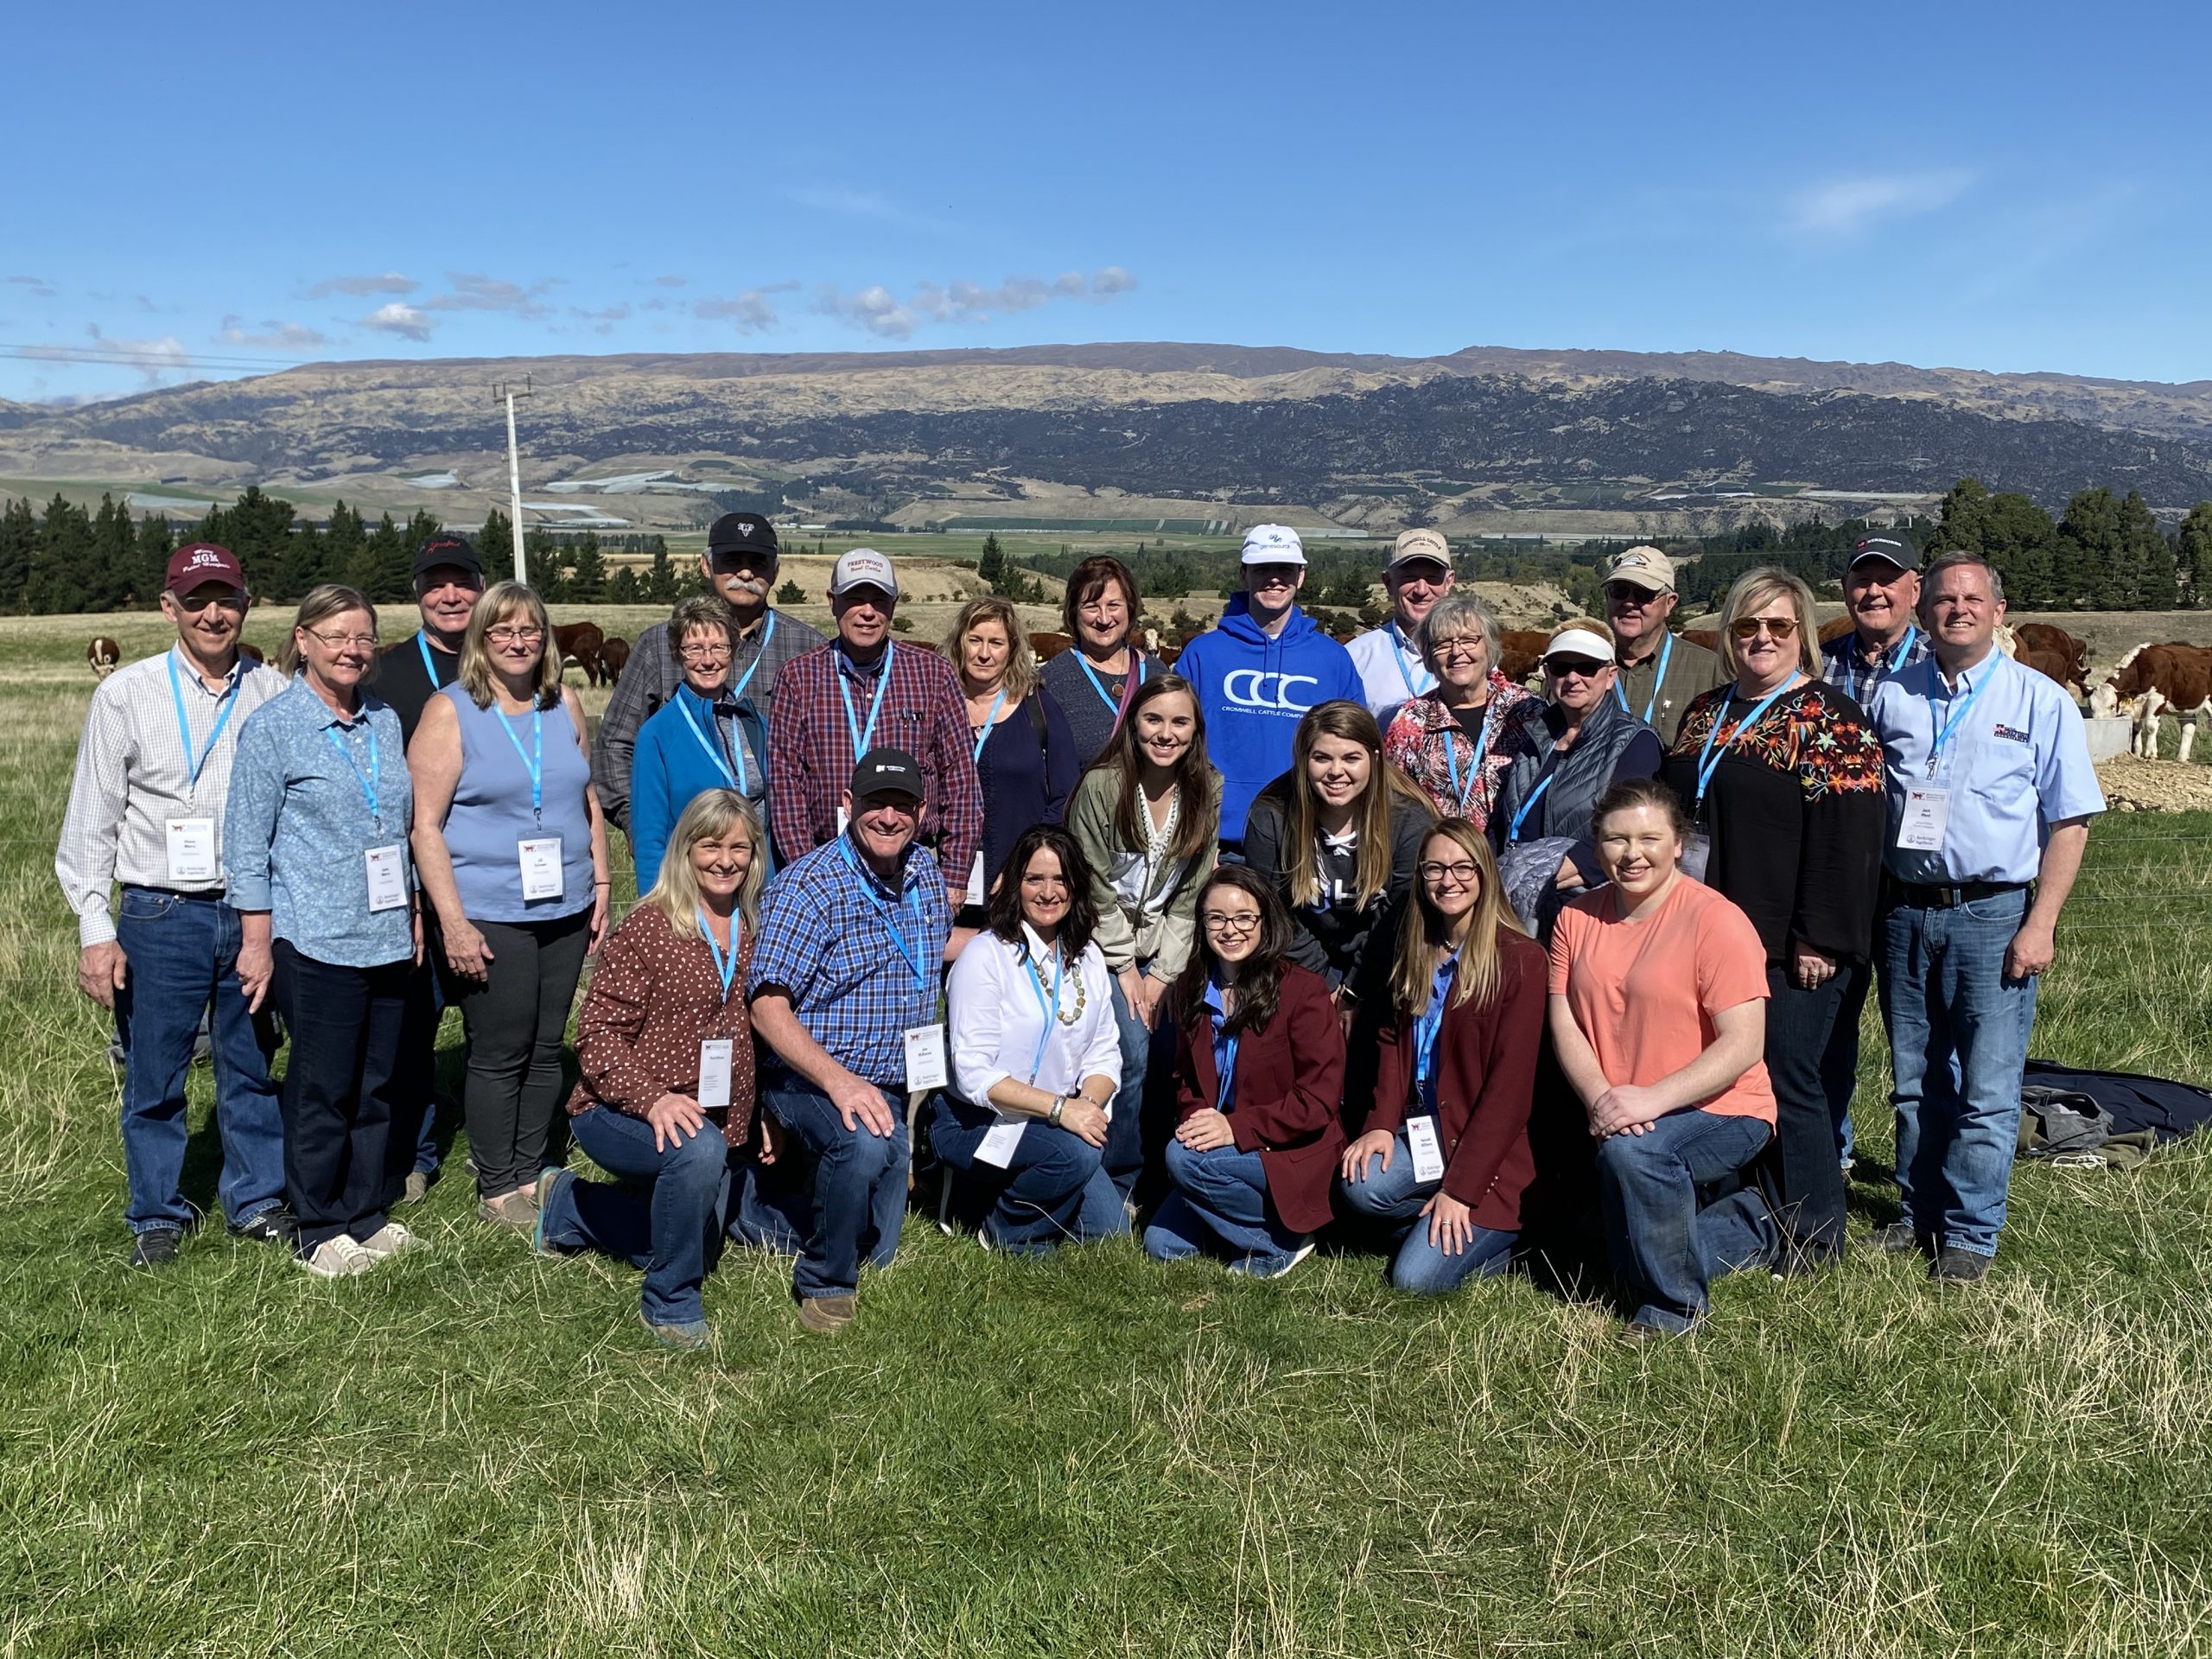 WORLD HEREFORD CONFERENCE – WHAT I LEARNED